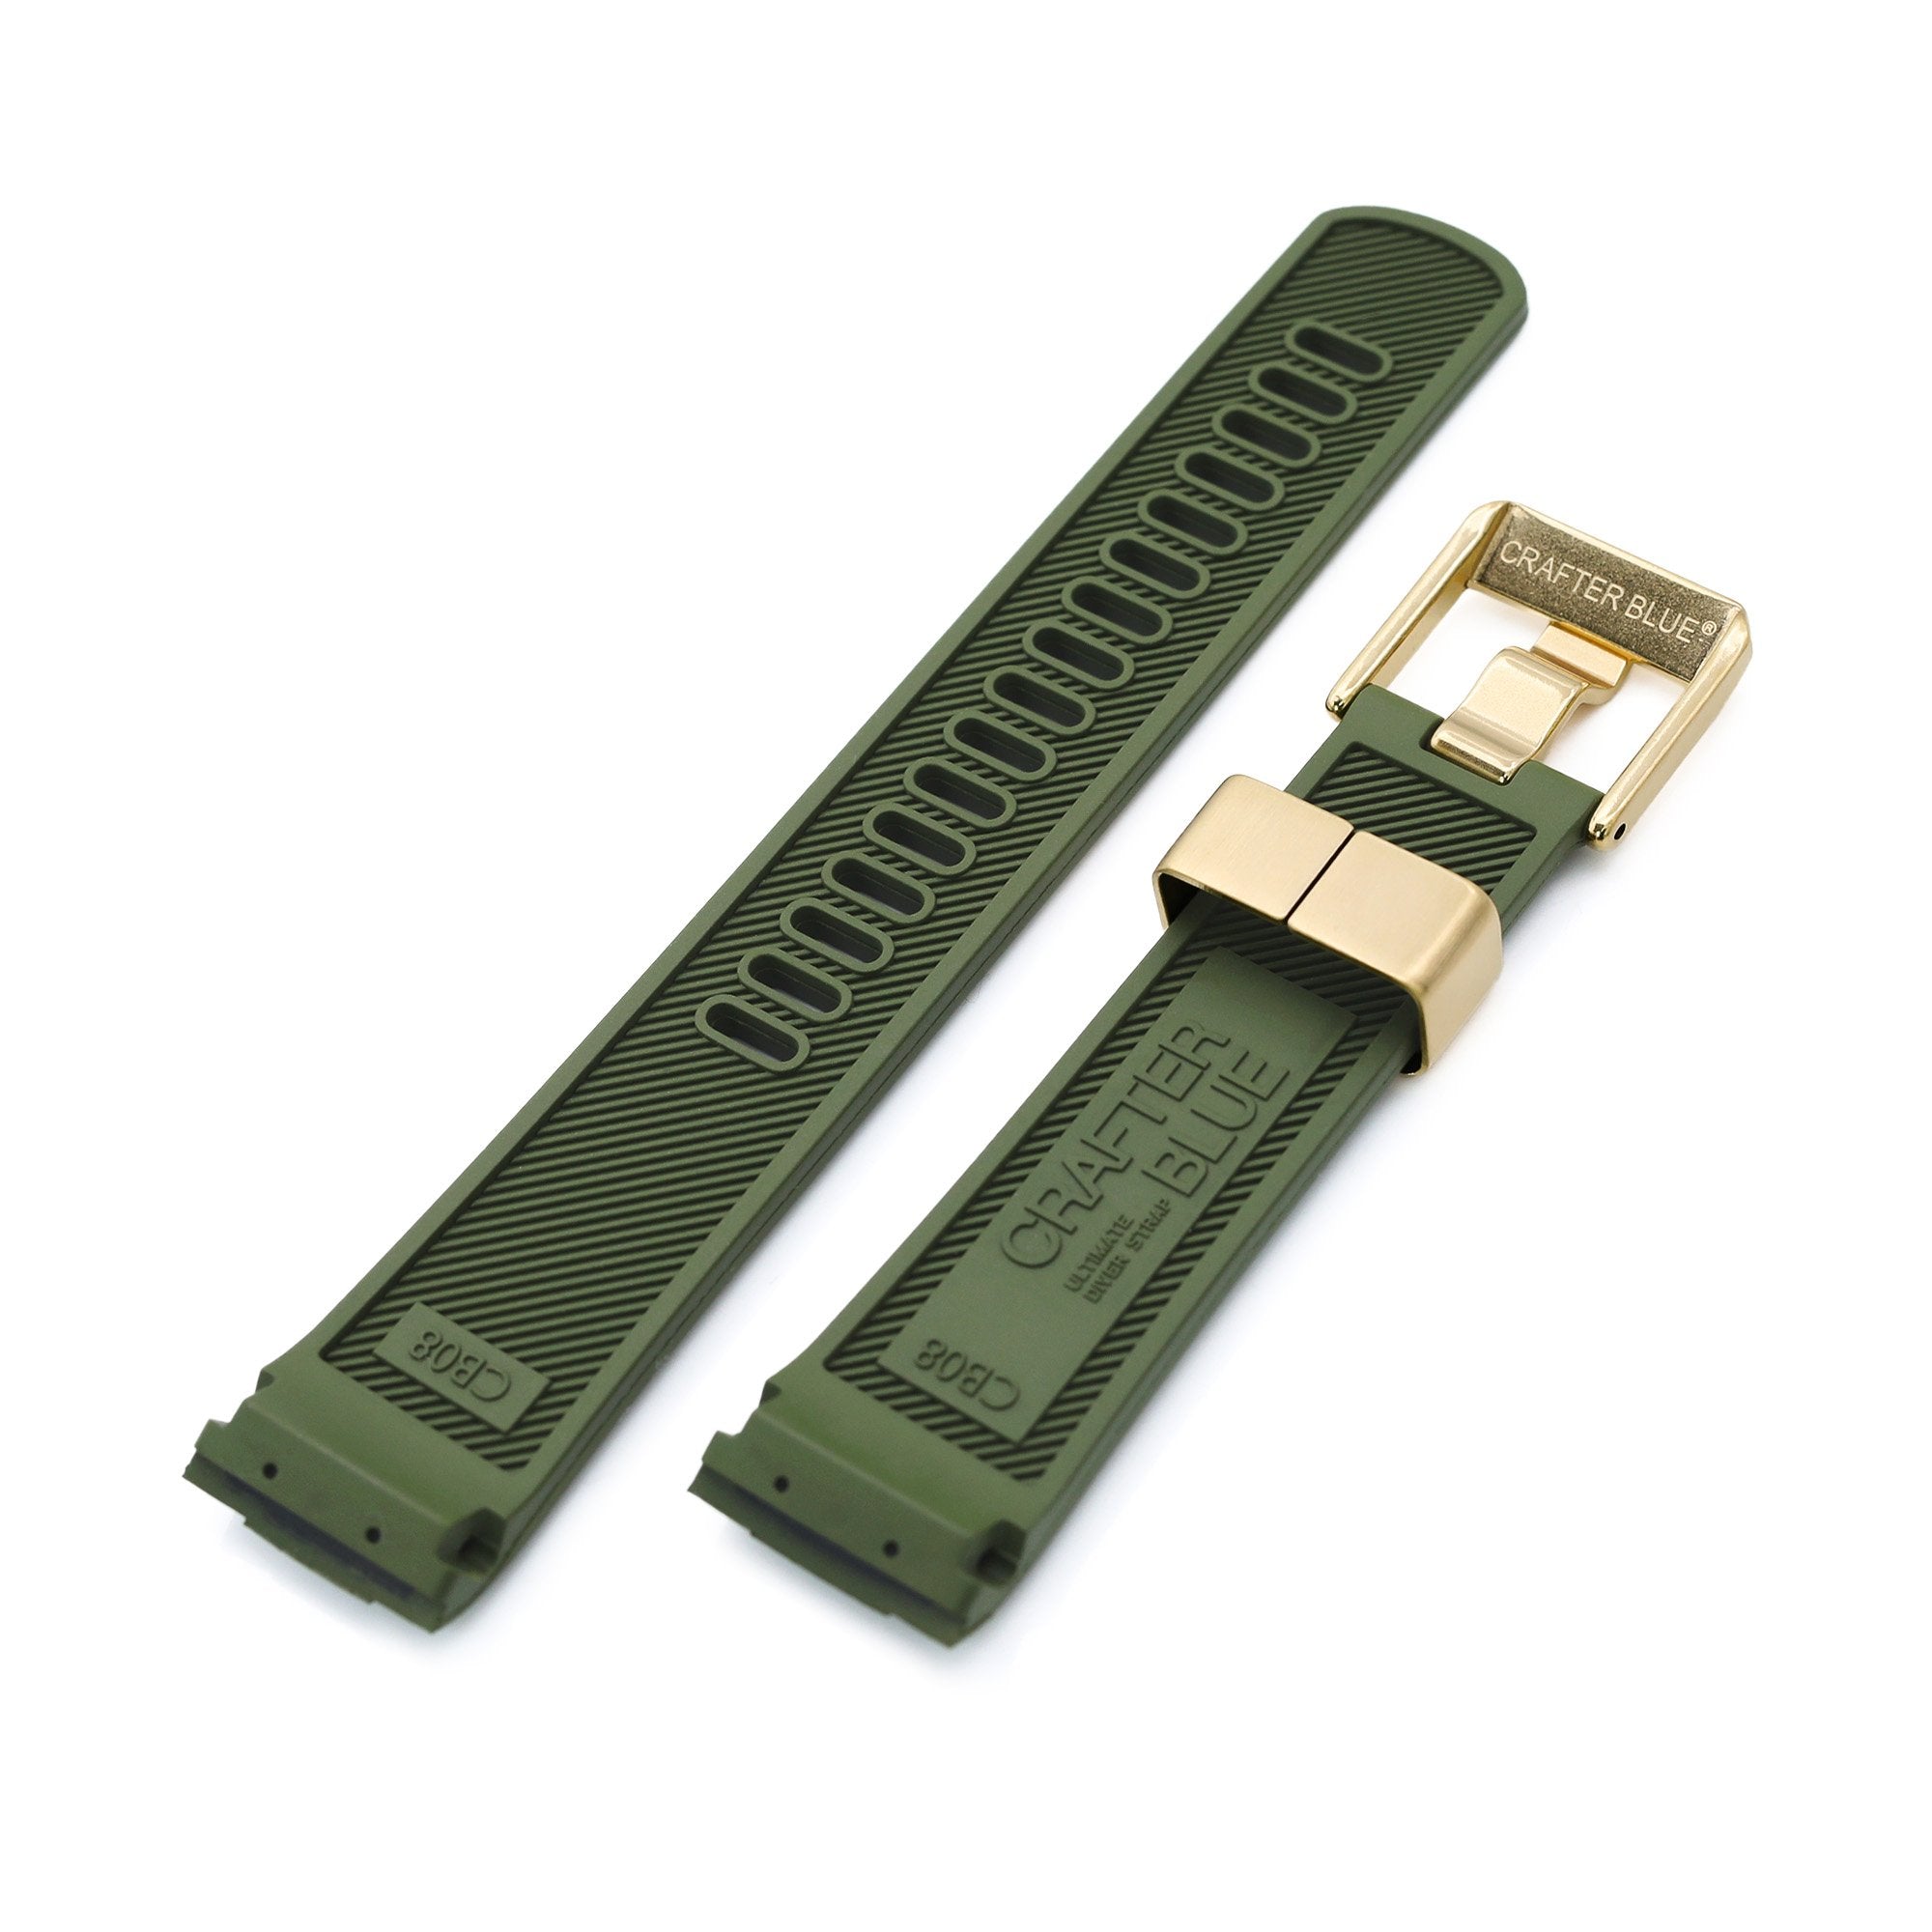 Crafter Blue 22mm Curved Lug End Military Green Rubber Dive Watch Strap for Seiko Gold Turtle SRPC44 IP Gold Buckle Strapcode Watch Bands